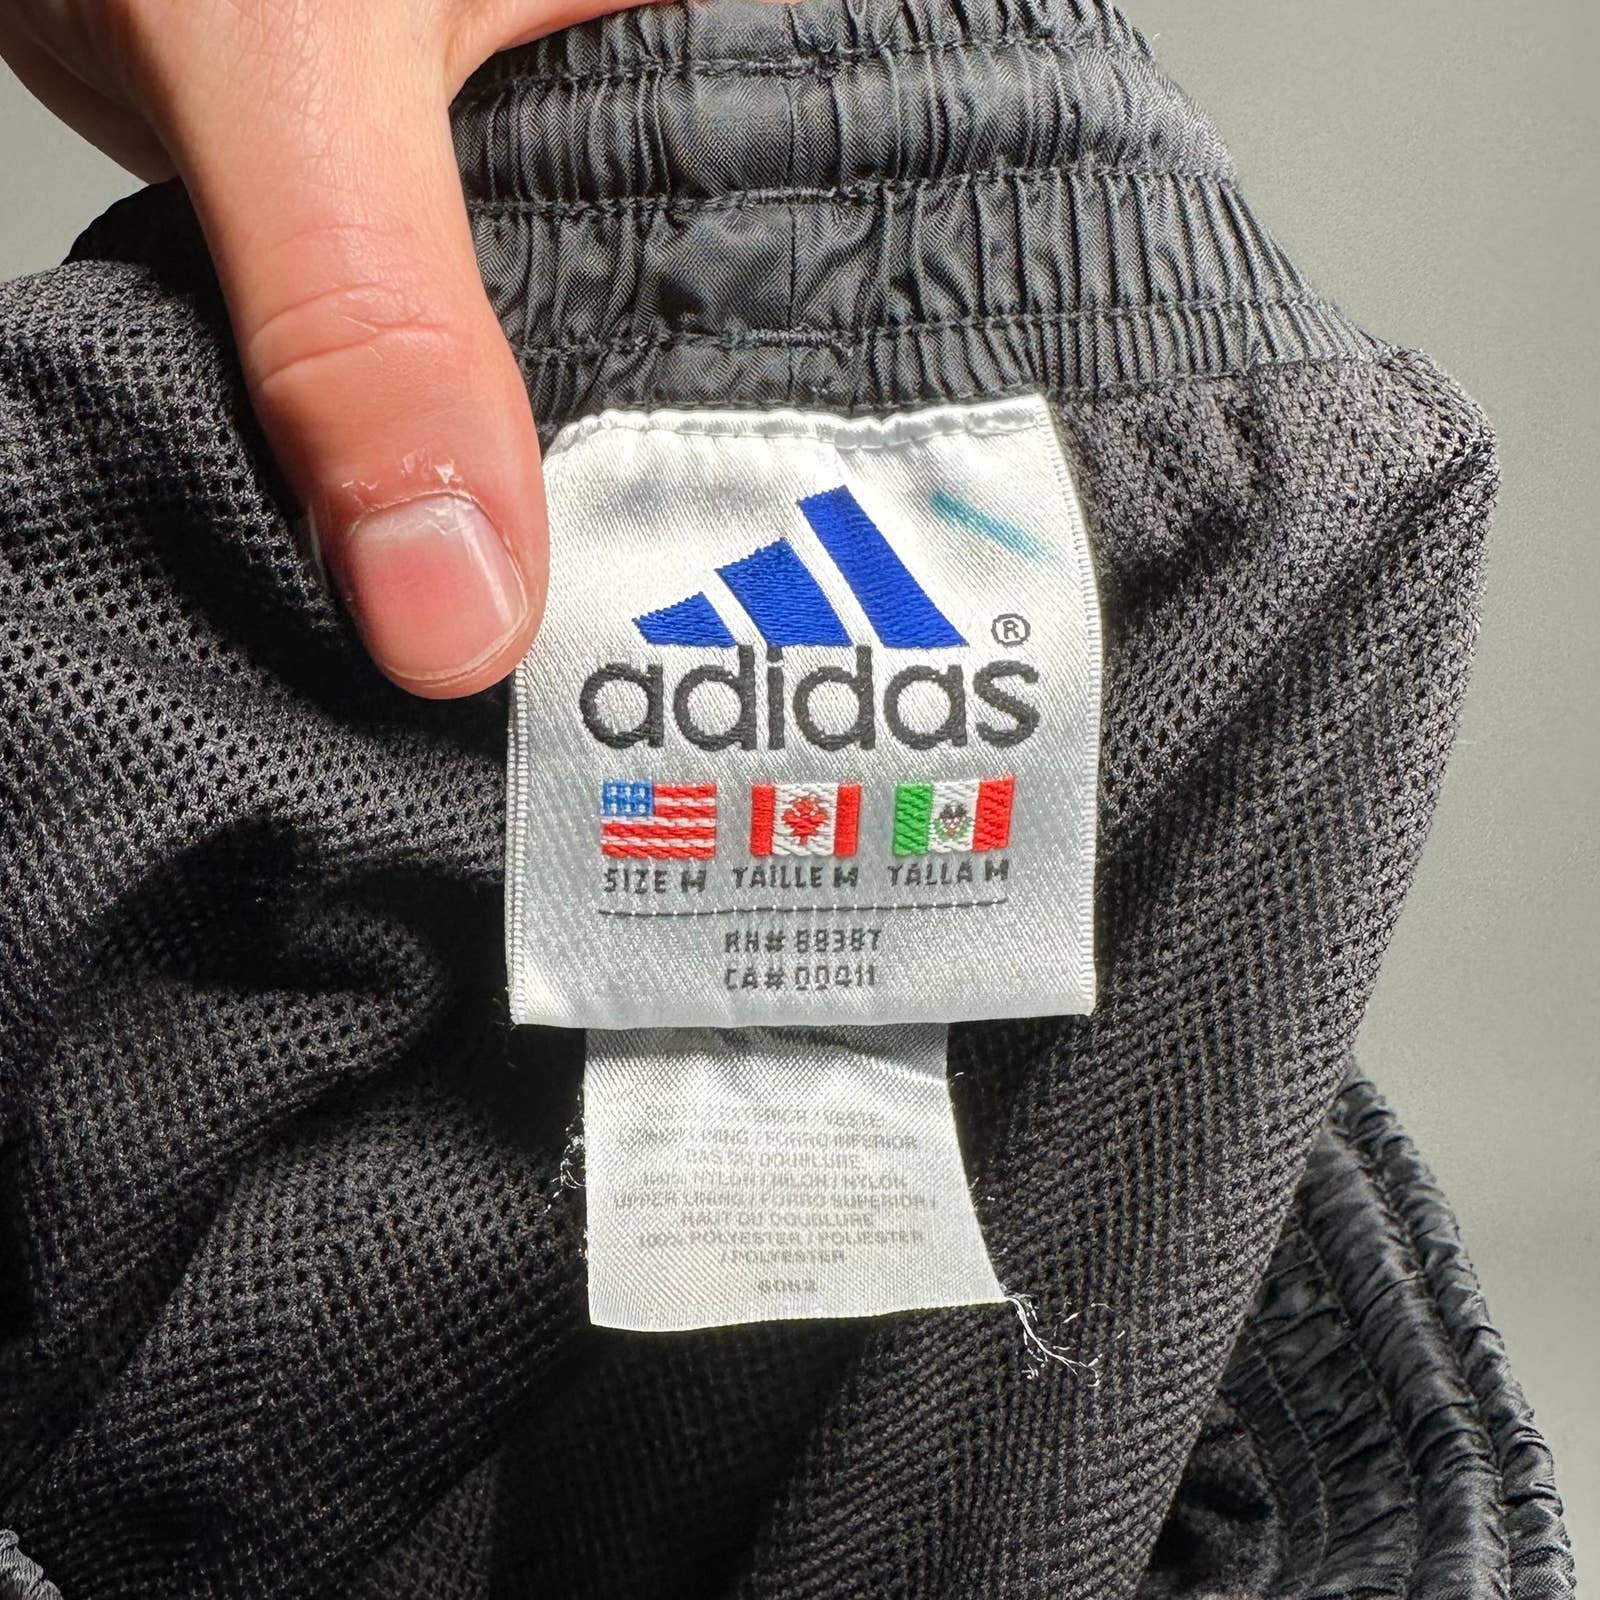 Vintage Adidas Track Pants Jet Black Nylon Sweatpants Grey 3 Stripes Baggy  Fit Mesh Lined Has Ankle Zippers White Tag 90s -  Canada